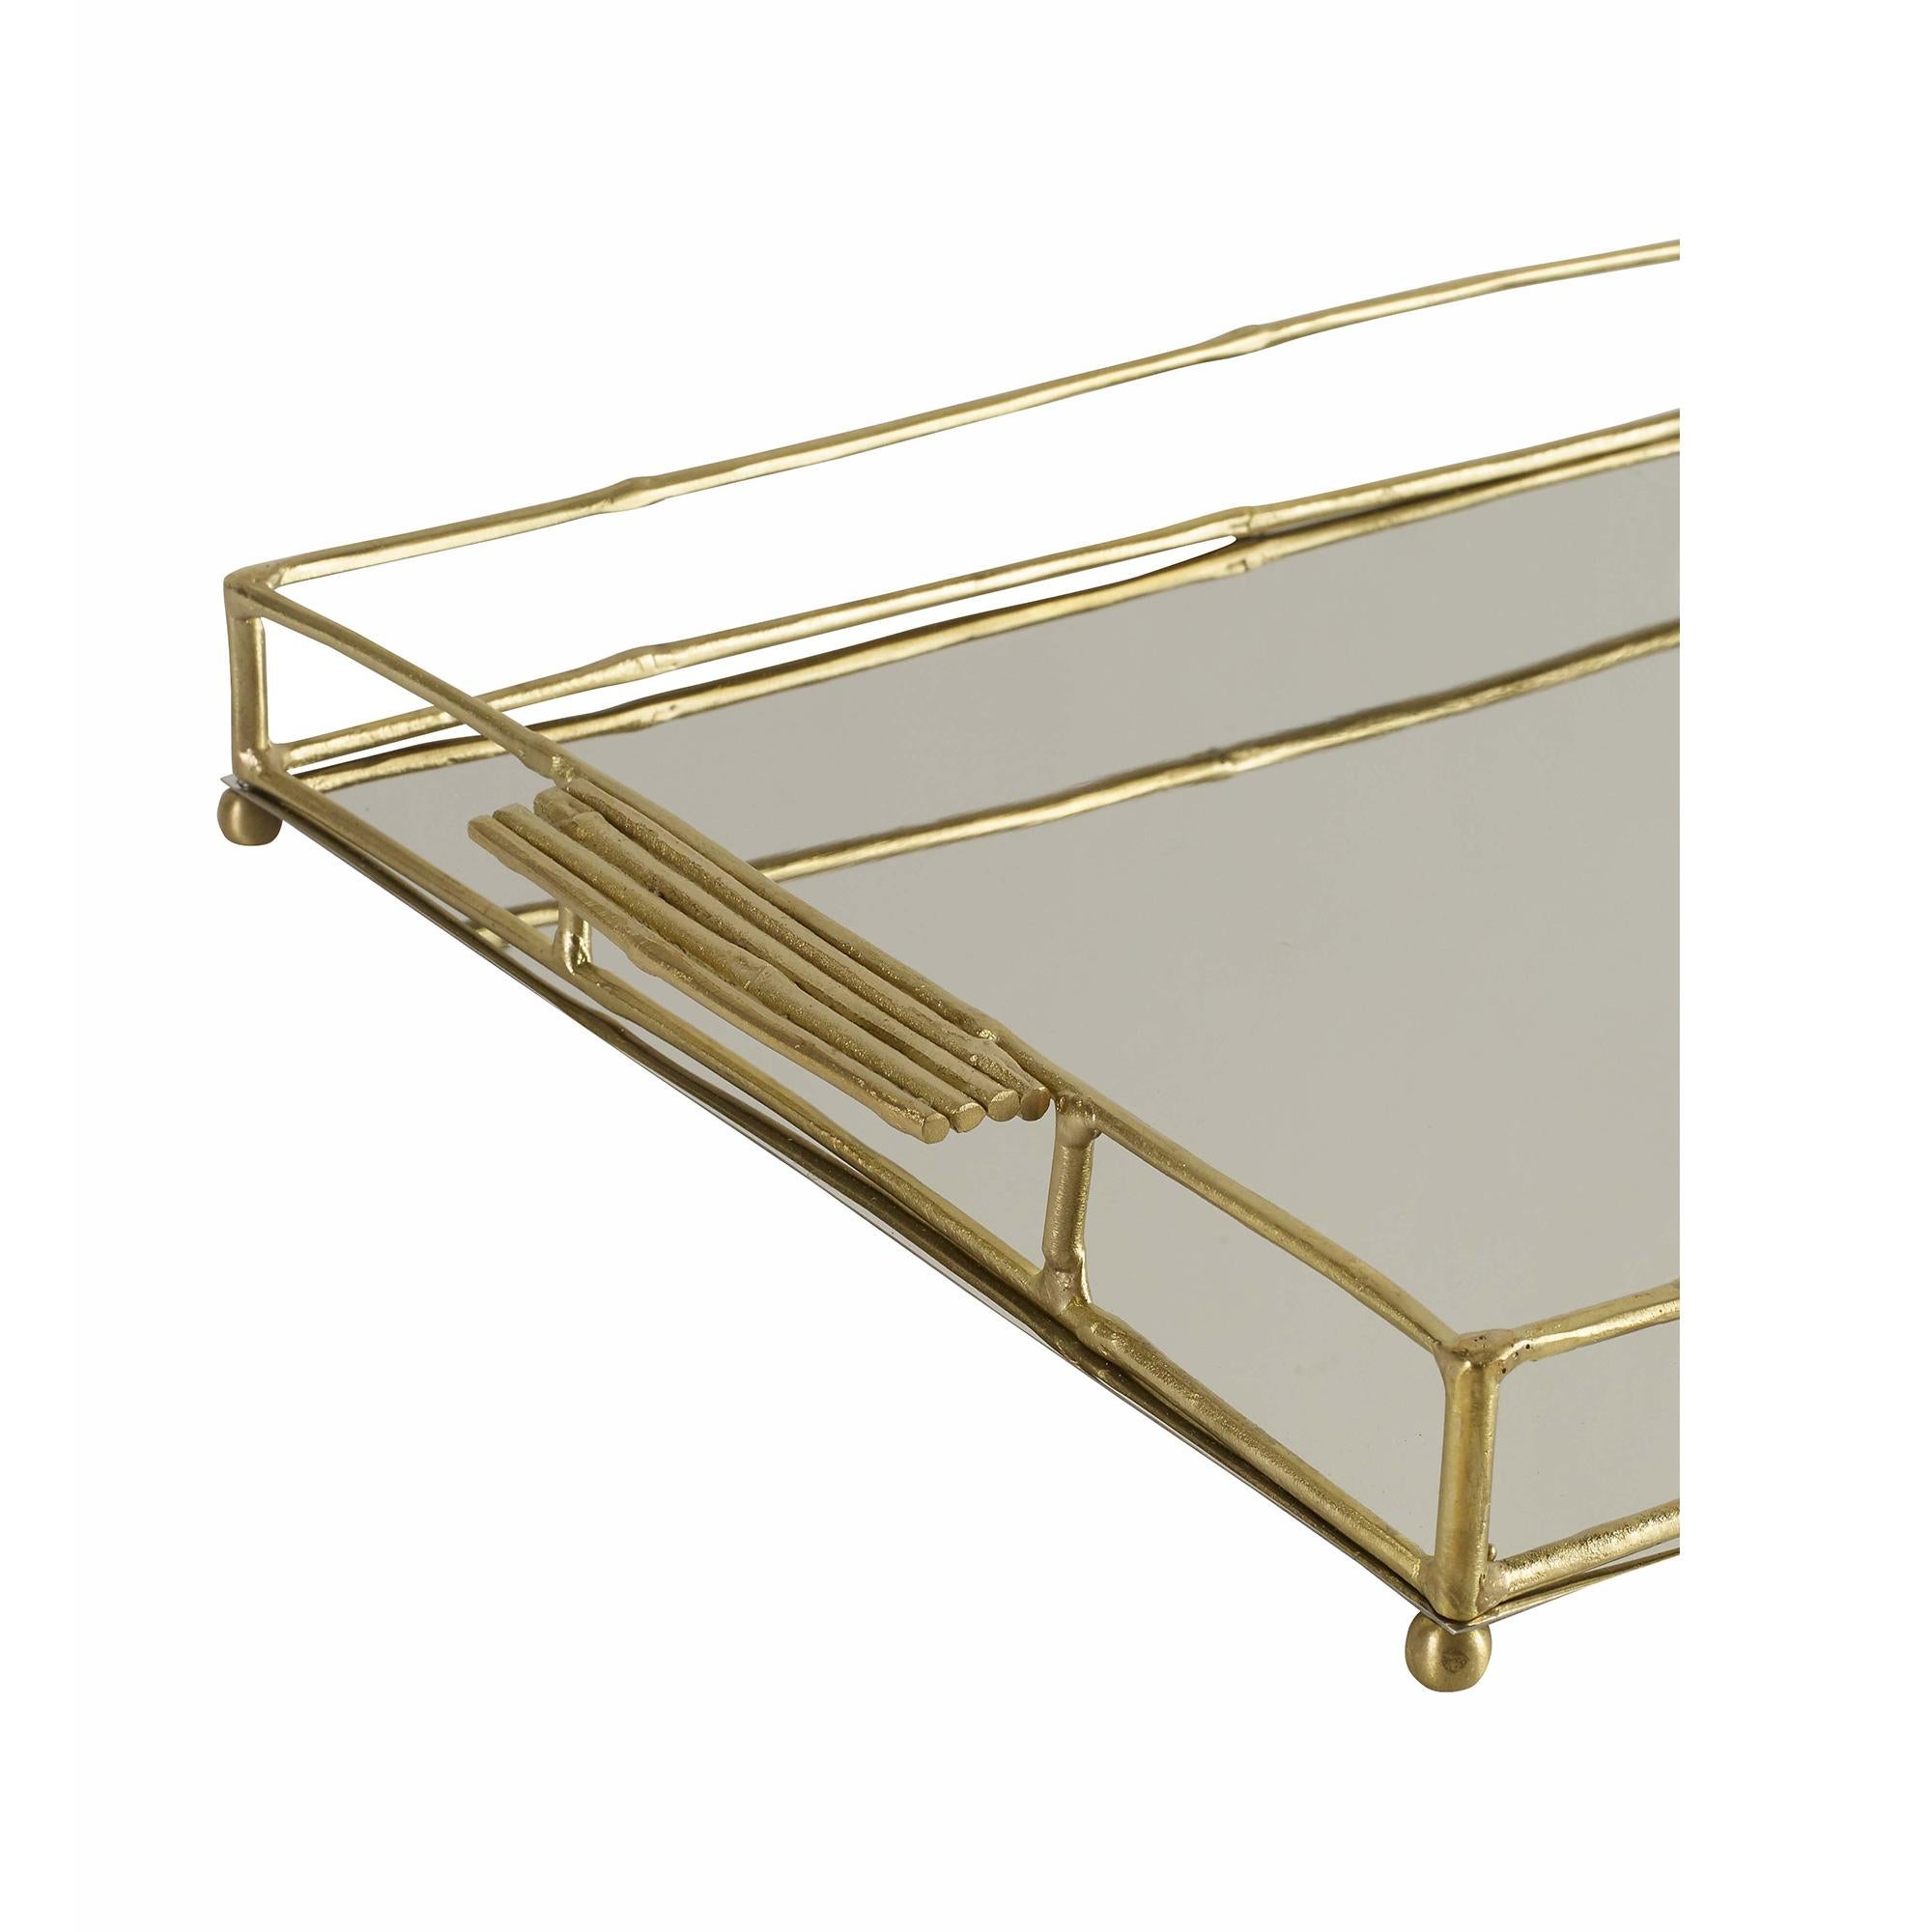 A handmade tray made of brass and stainless steel. The brass sides of the tray are casted to resemble bamboo.
 